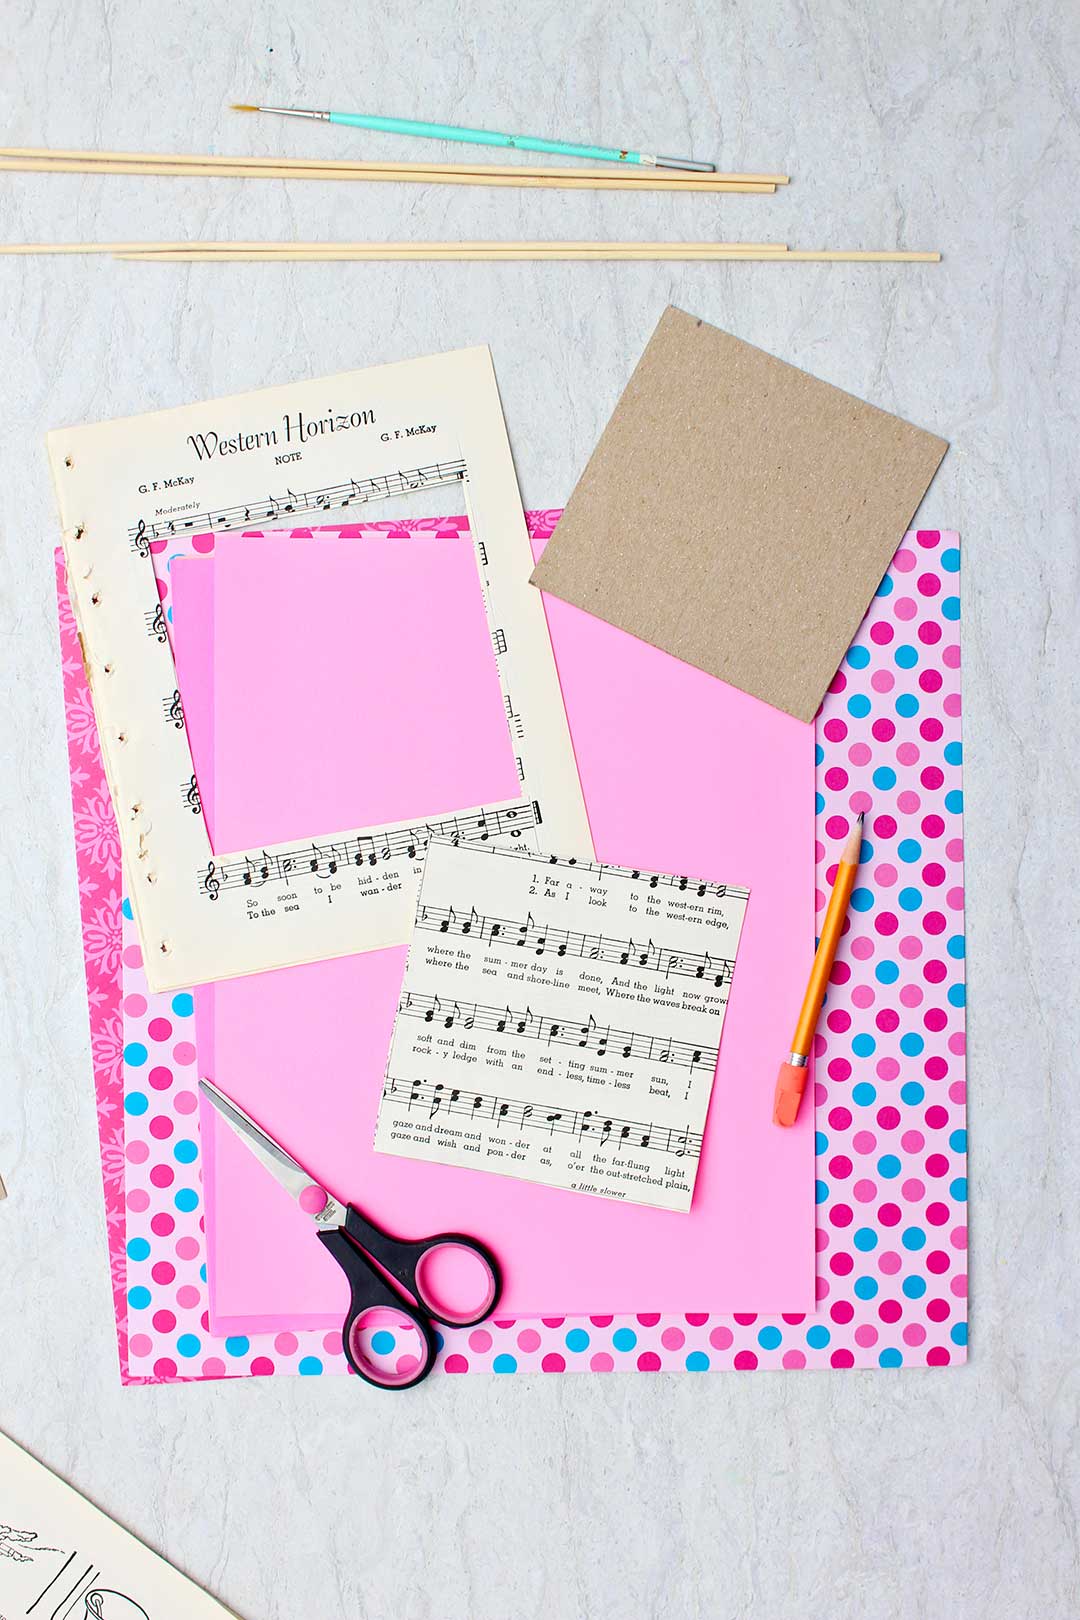 A piece of sheet music cut into a square rests on top of a stack of pink scrapbook paper.